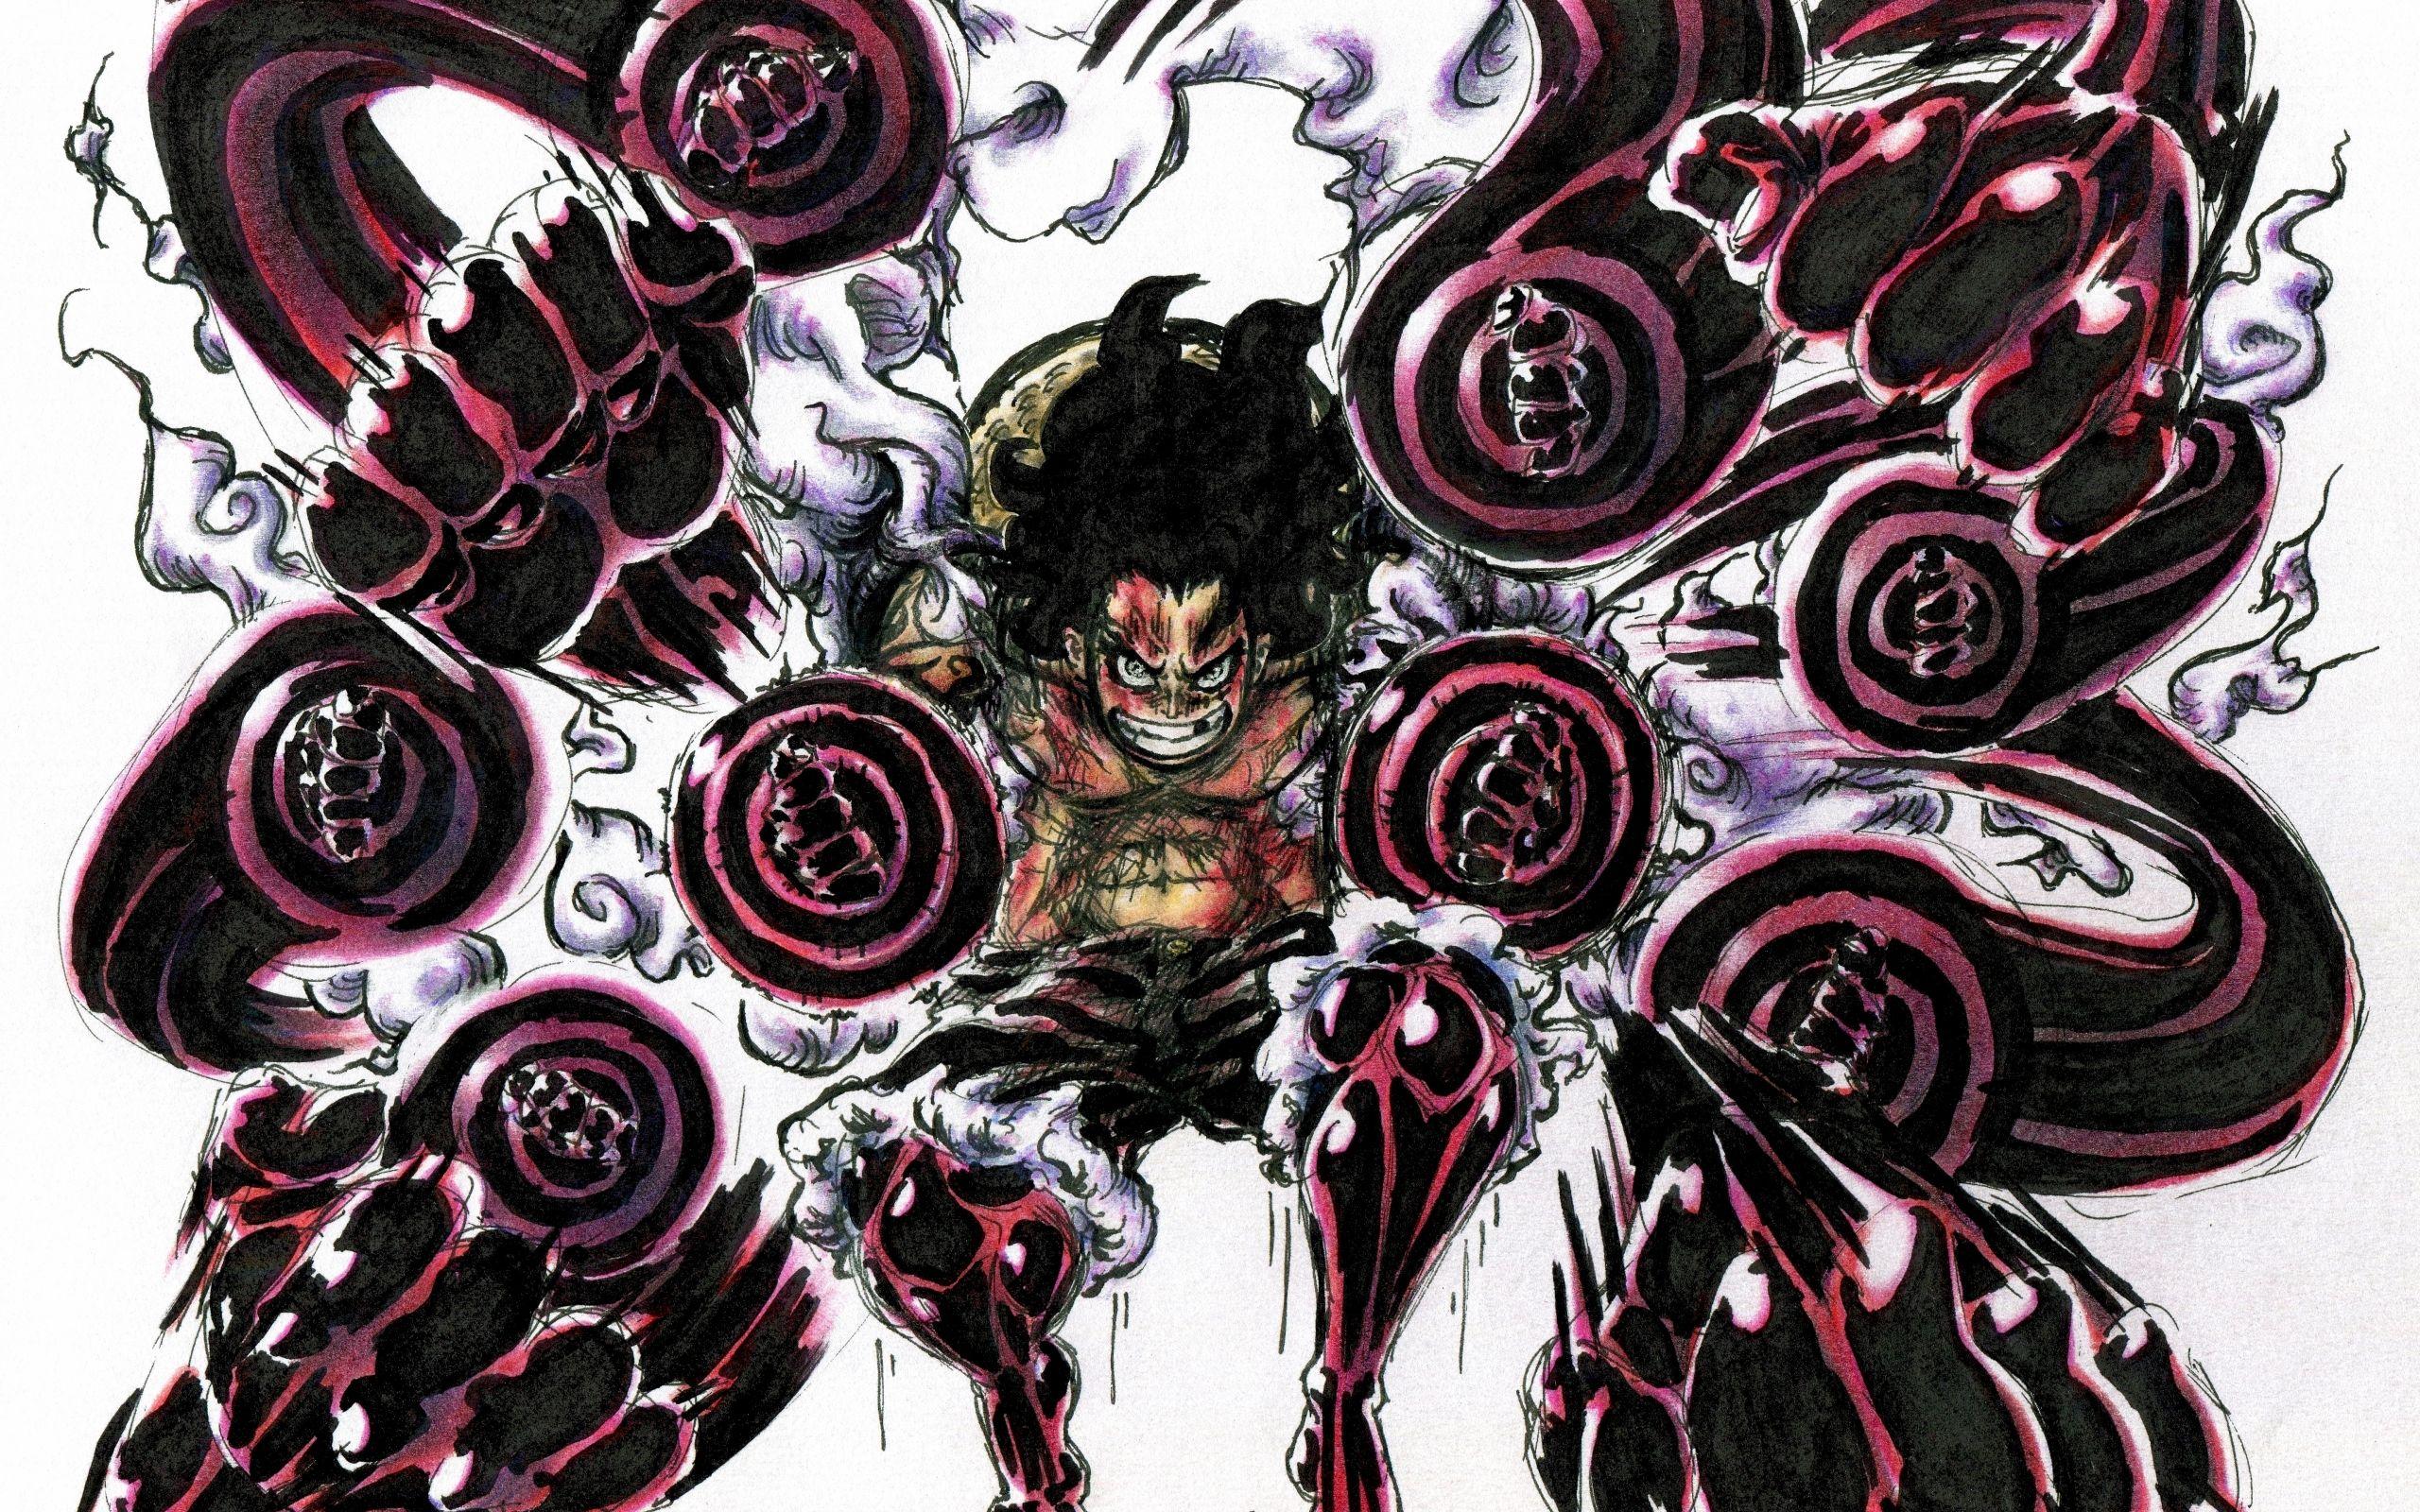 Luffy Gear 4 Wallpapers - Top Free Luffy Gear 4 Backgrounds